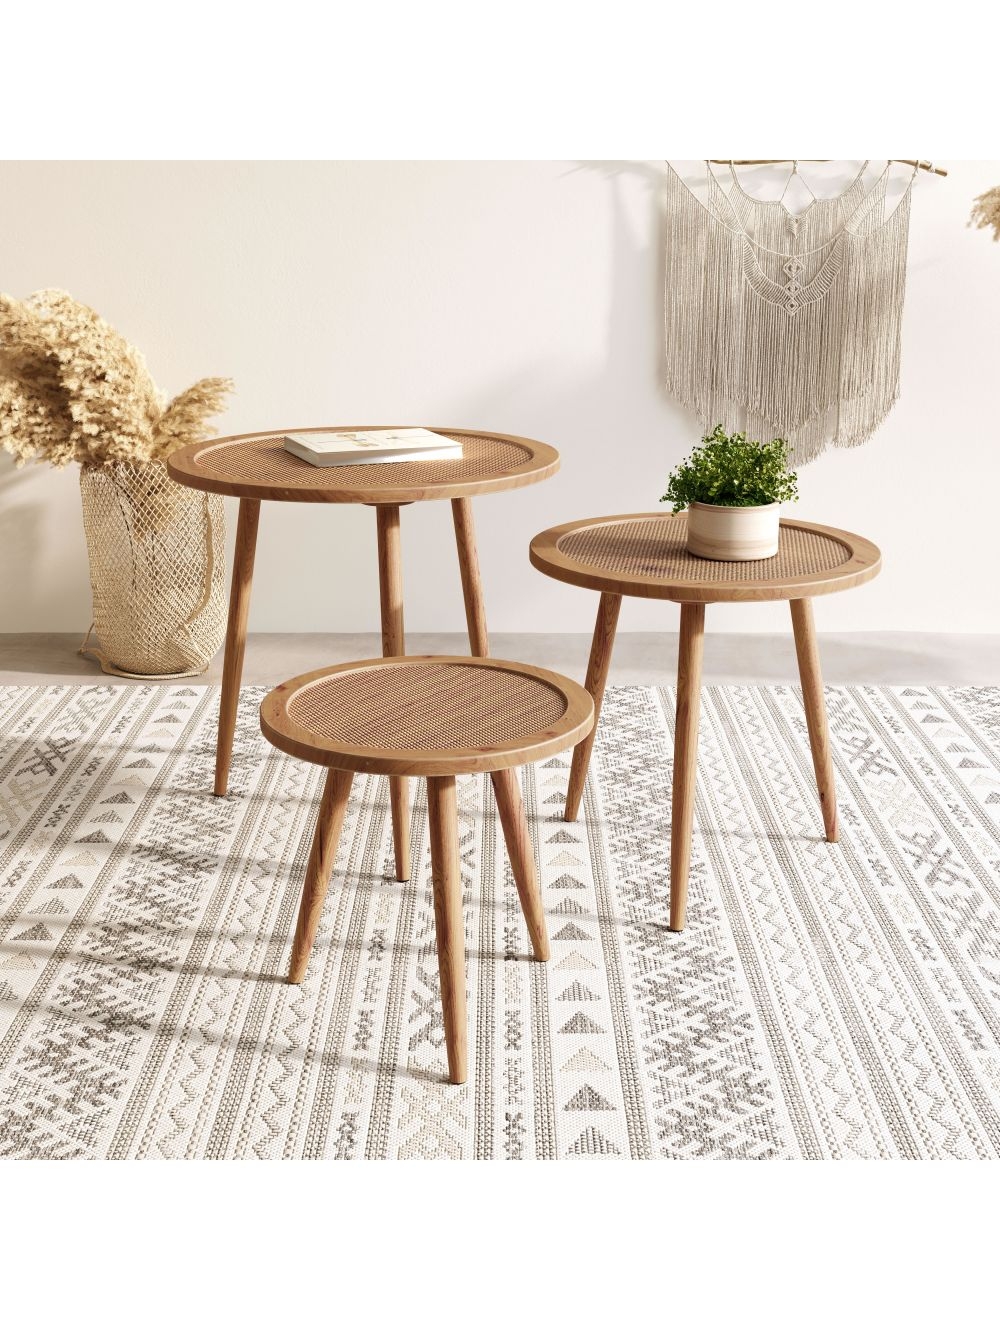 Tobyn Accent Tables, Set of 3 - Image 6